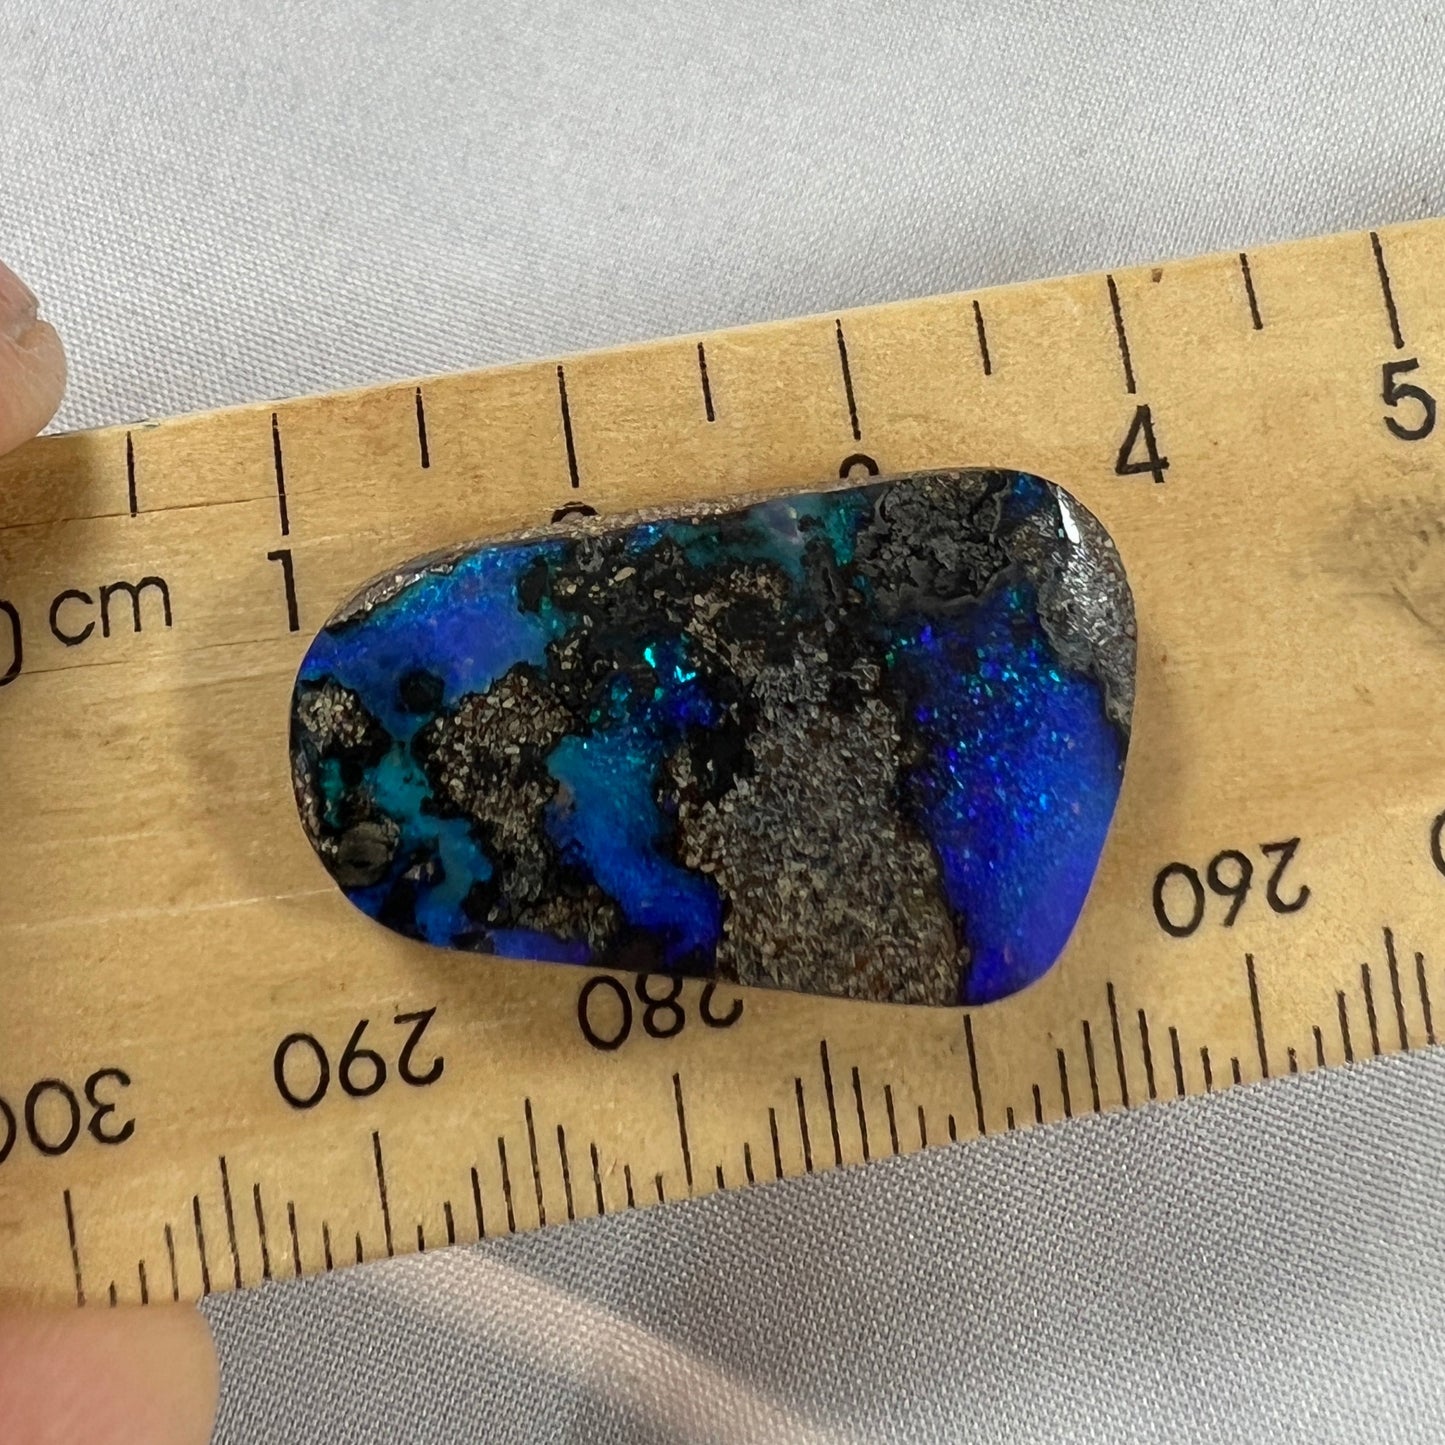 Stunning blues and greens in this great piece of boulder opal from Winton, Queensland.